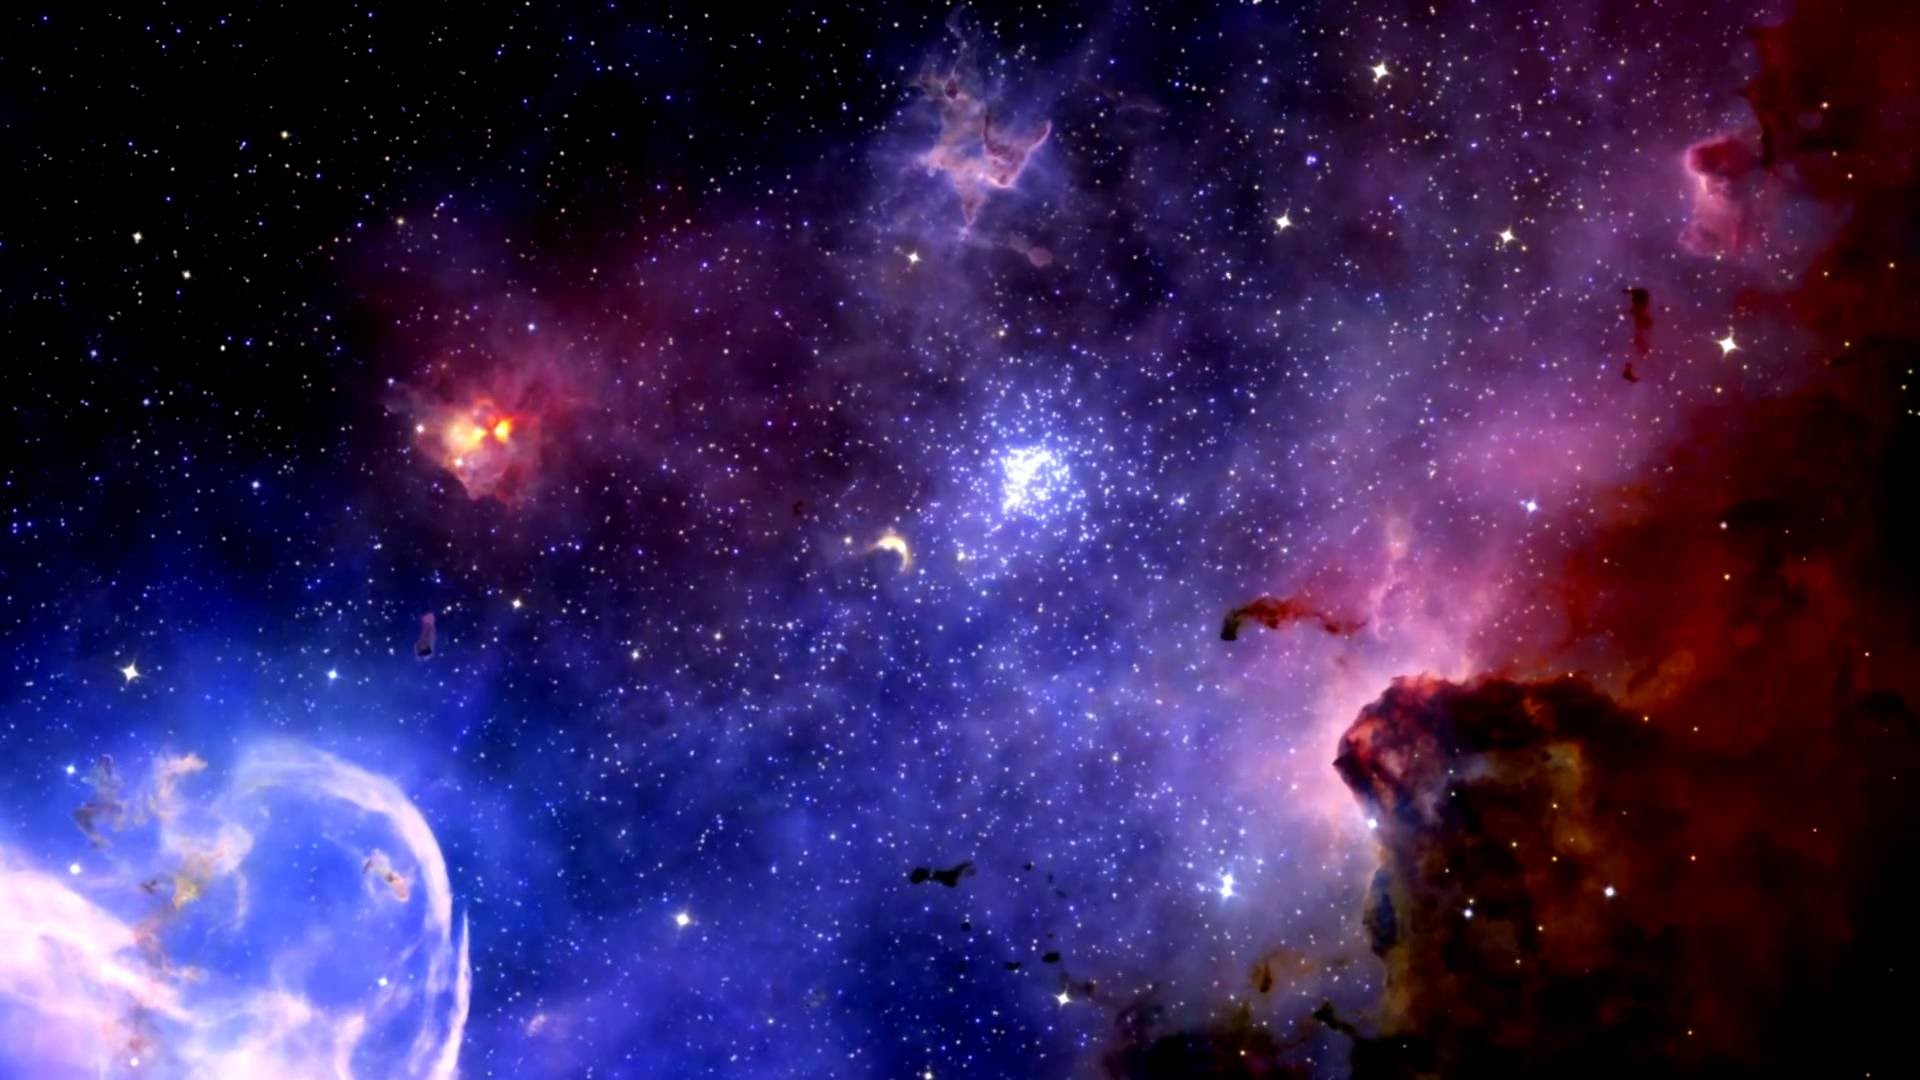 1920x1080 "Across the Universe" Cover by 'Sound on Sound' - YouTube